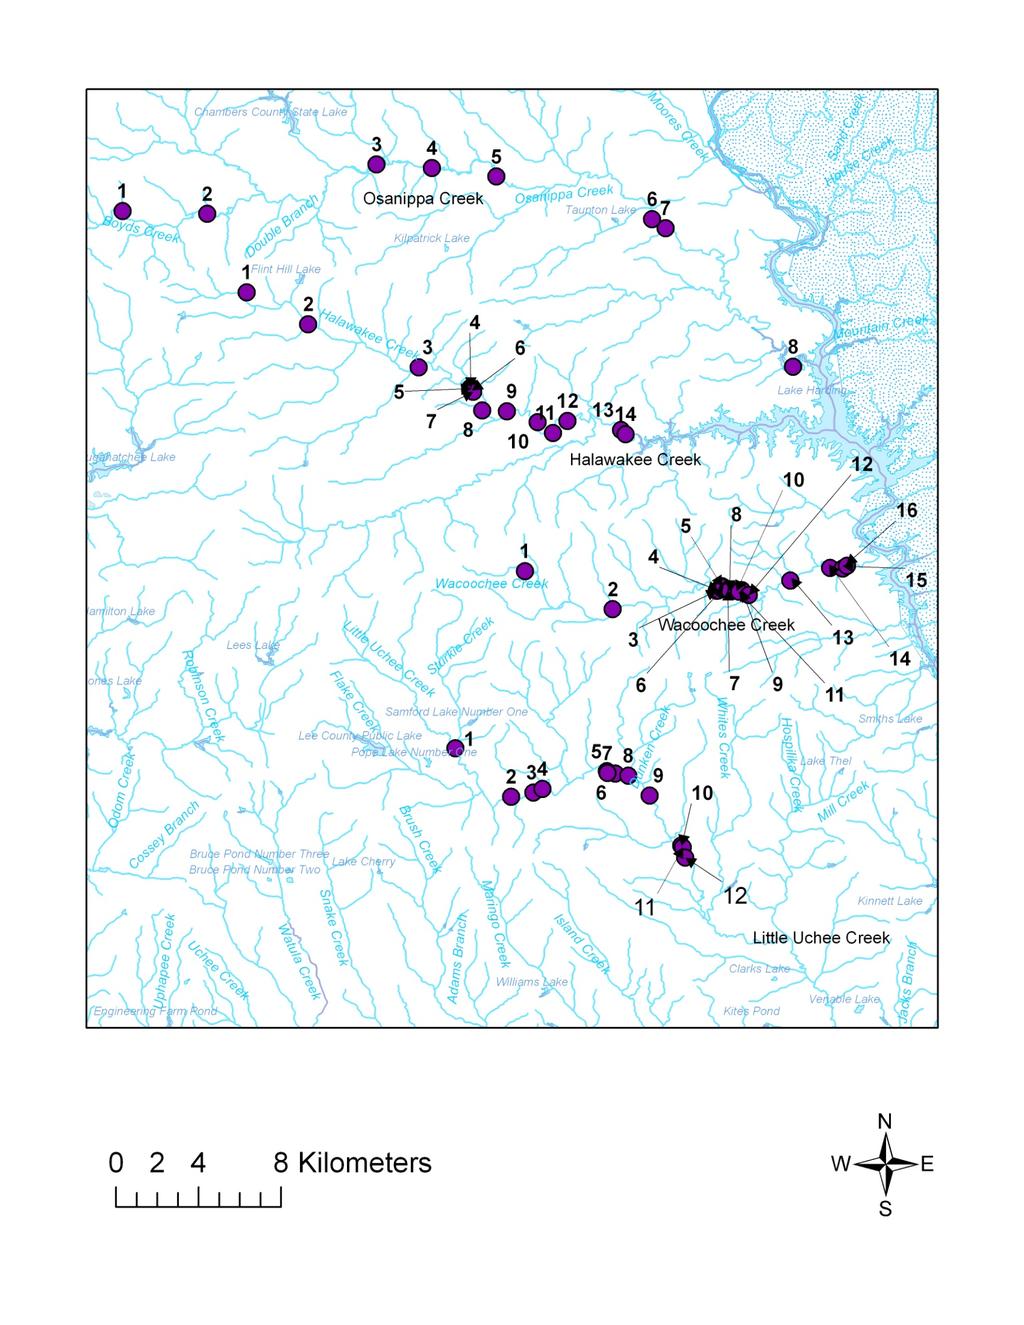 Figure 1. Sites sampled for fishes in the four study streams.